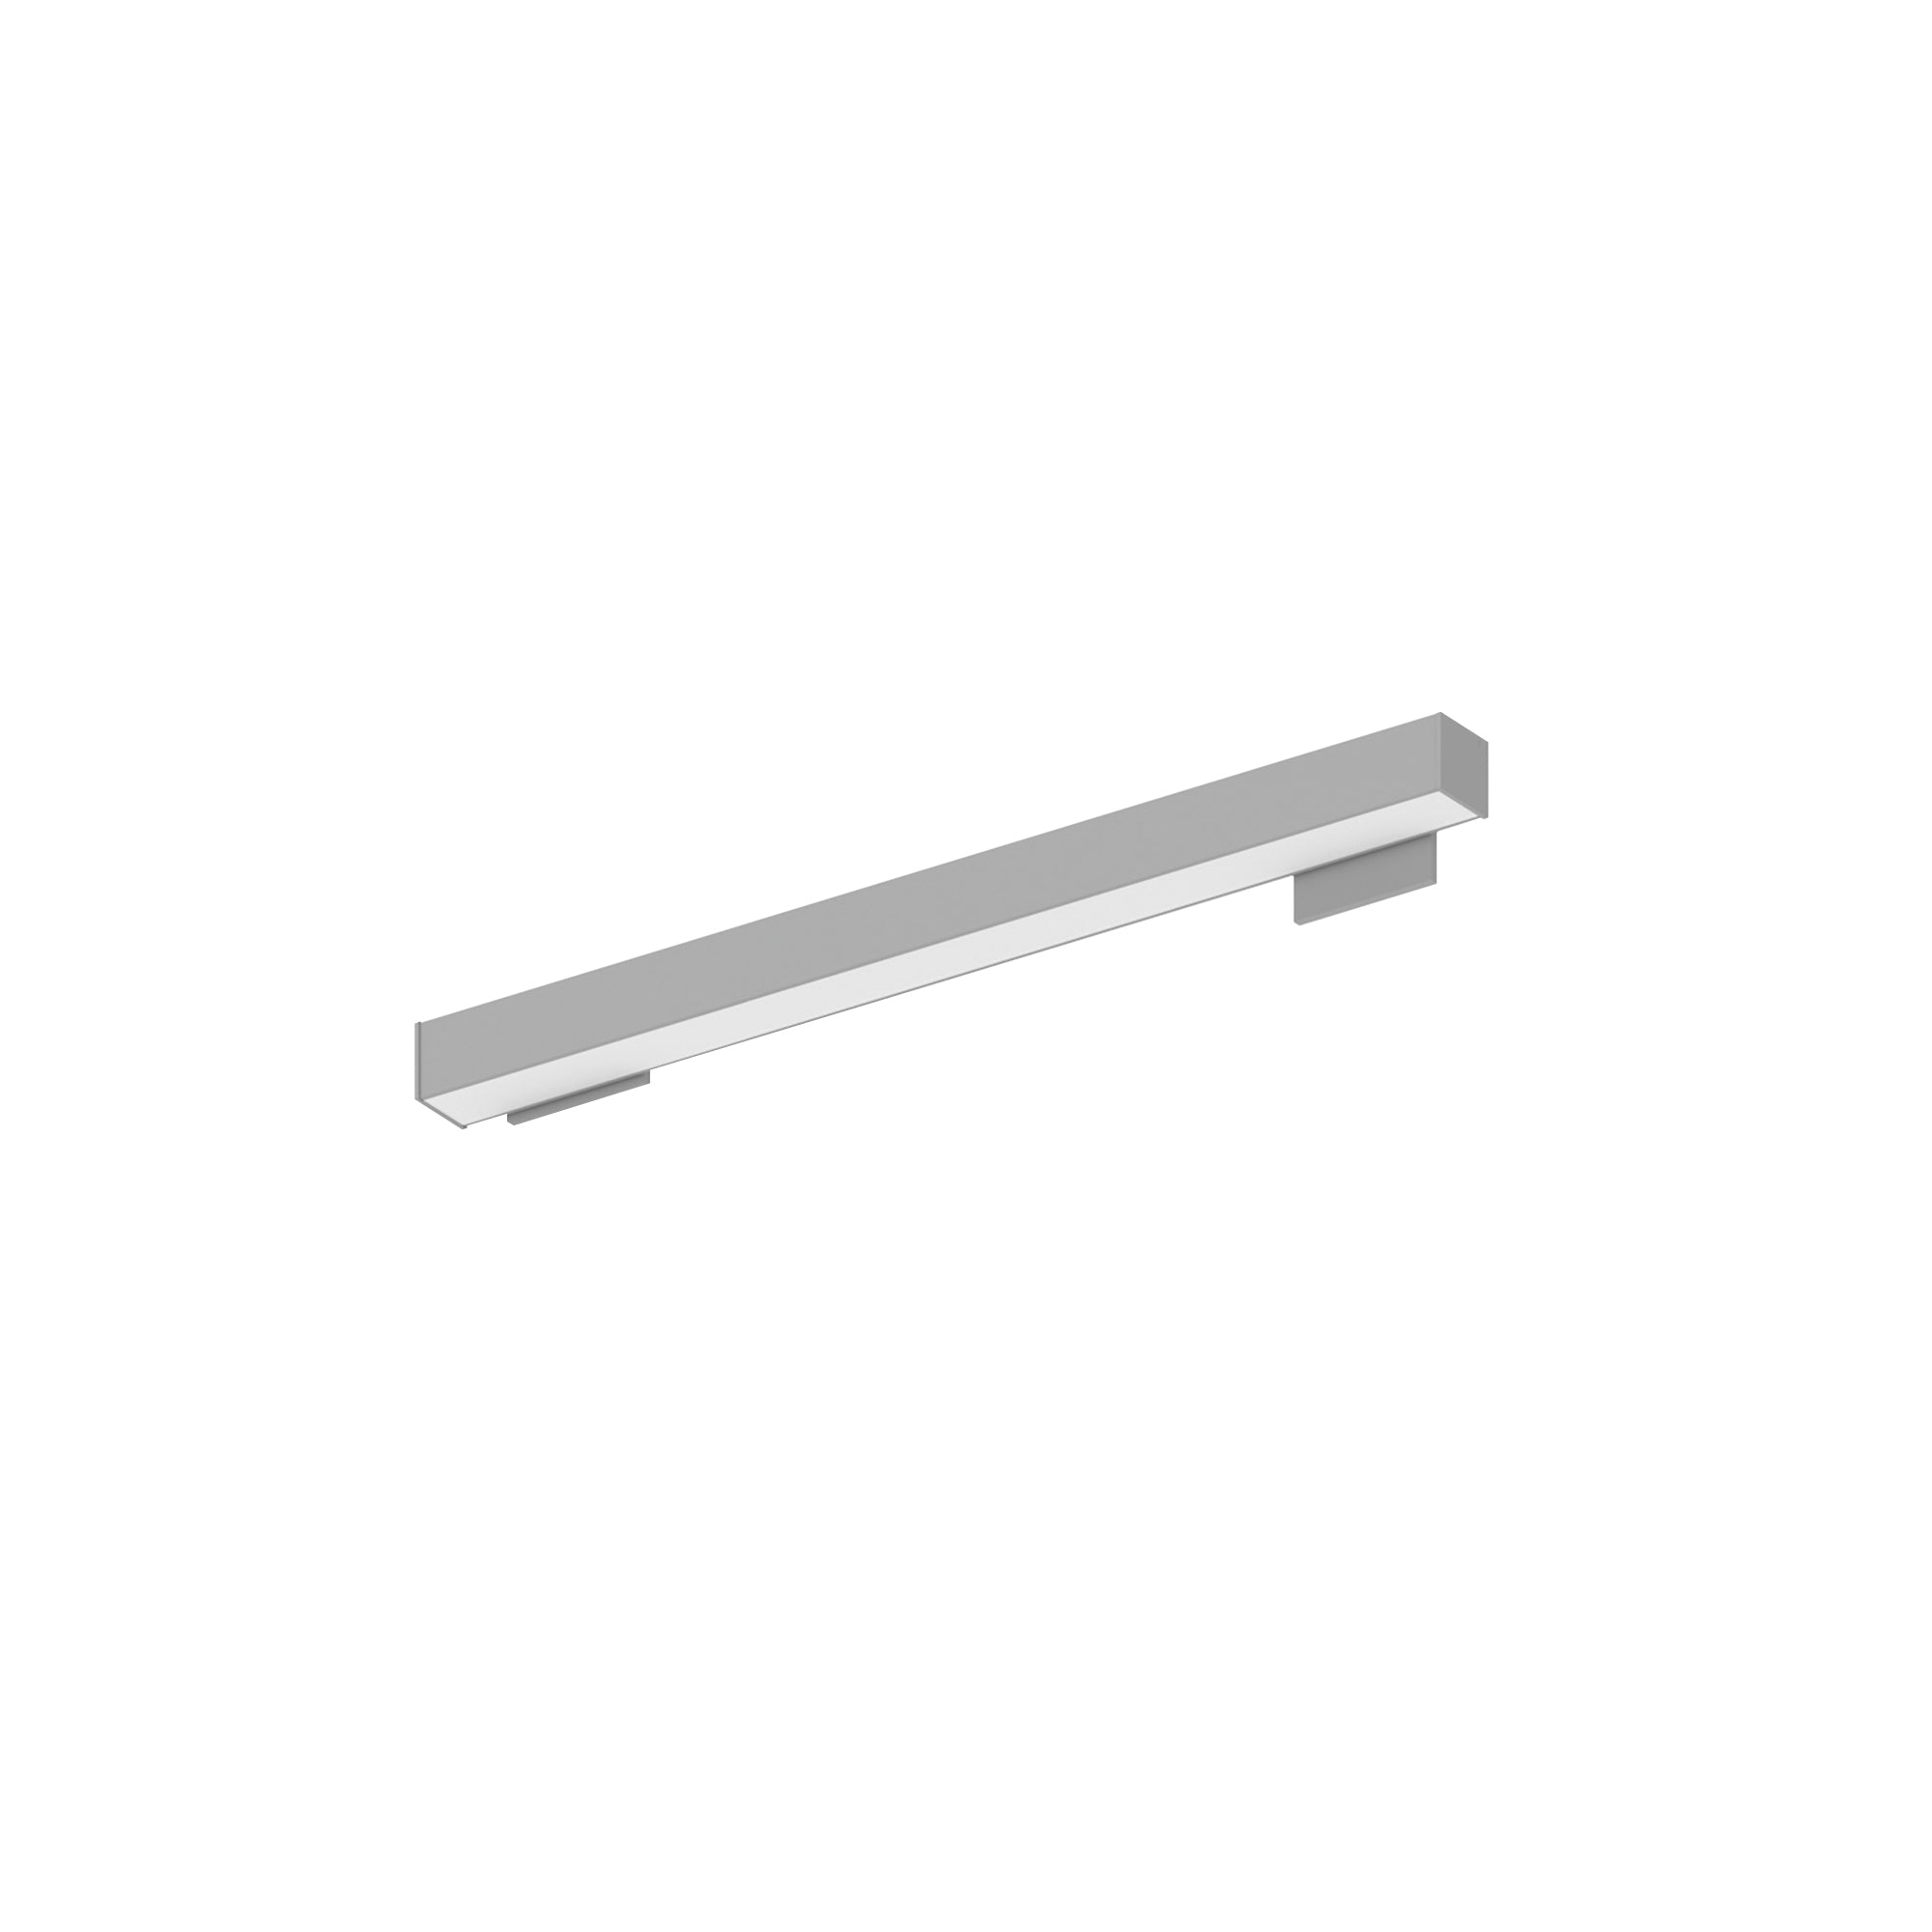 Nora Lighting NWLIN-21030A/L2-R4P - Linear - 2' L-Line LED Wall Mount Linear, 2100lm / 3000K, 2 Inchx4 Inch Left Plate & 4 Inchx4 Inch Right Plate, Right Power Feed, Aluminum Finish